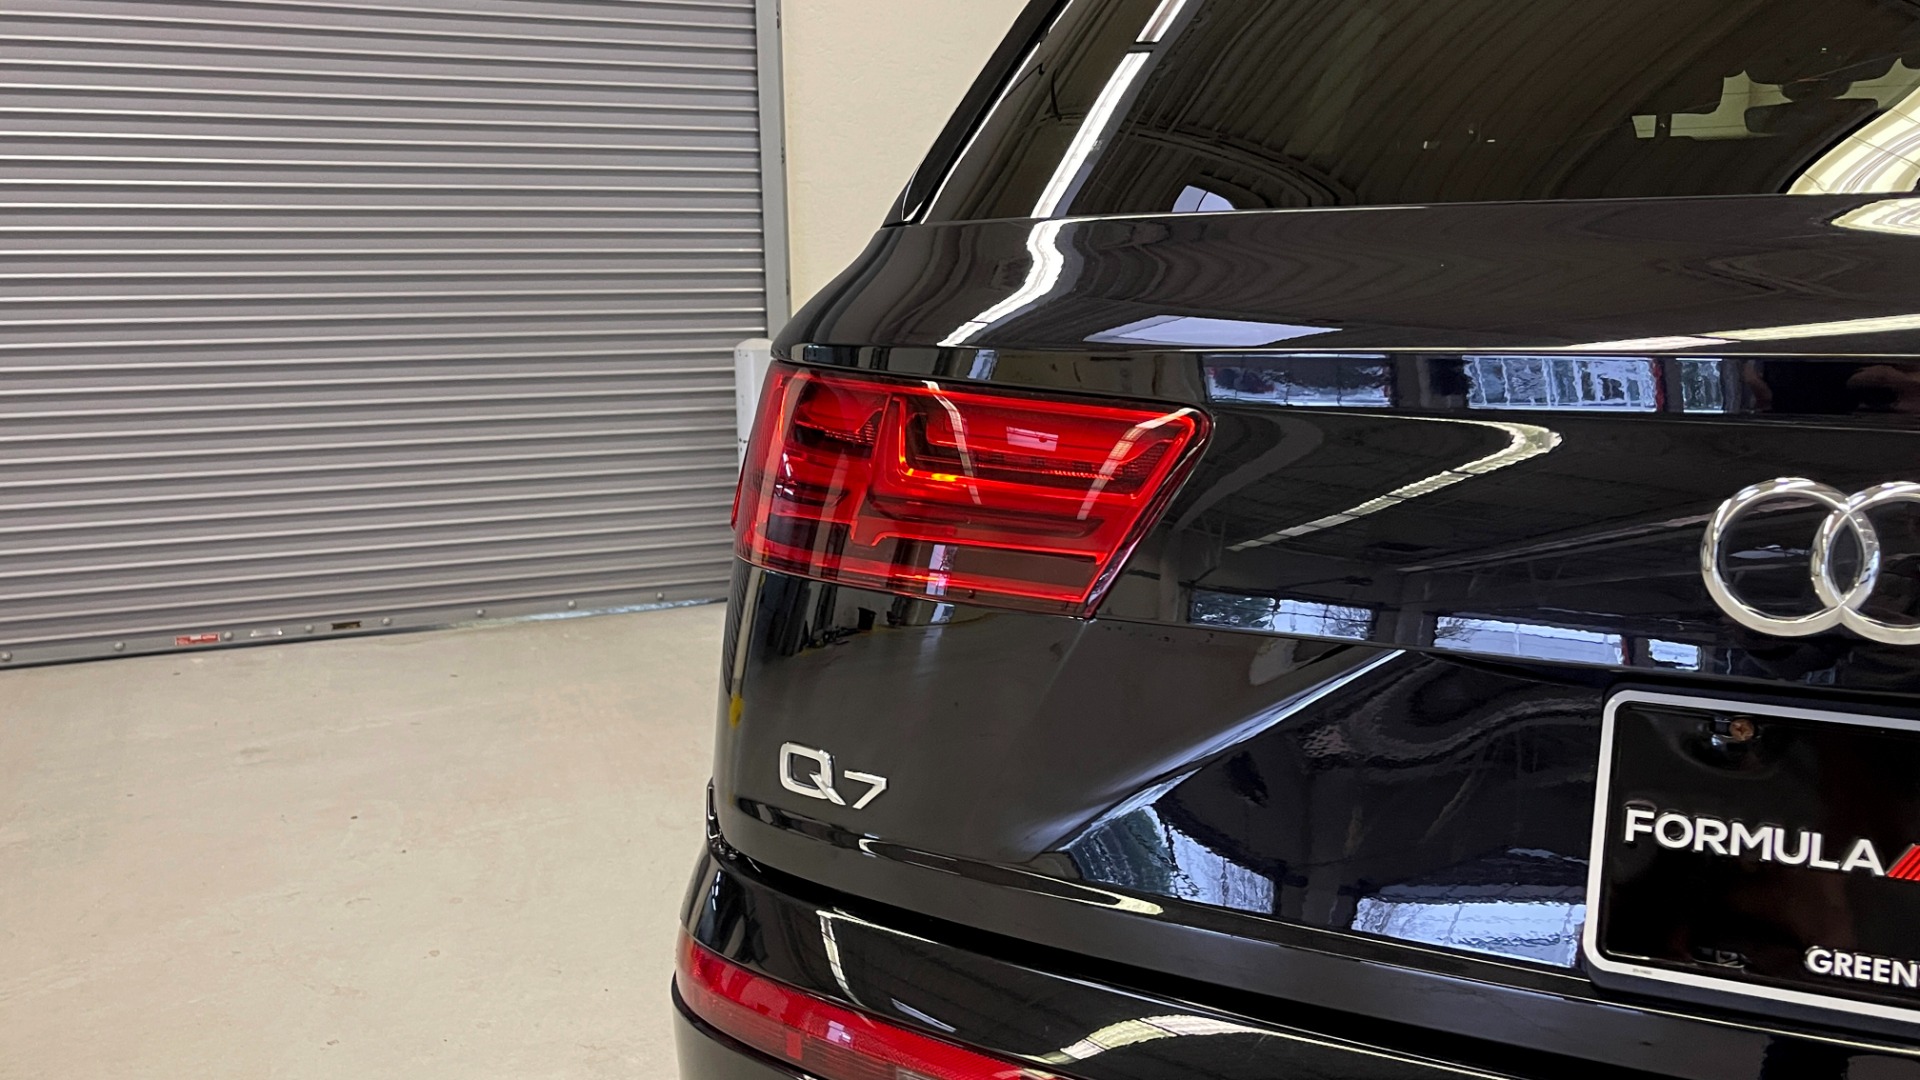 Used 2019 Audi Q7 PREMIUM PLUS / NAV / SUNROOF / DRVR ASST / COLD WTHR / 20IN WHLS / REARVIEW for sale $51,795 at Formula Imports in Charlotte NC 28227 14